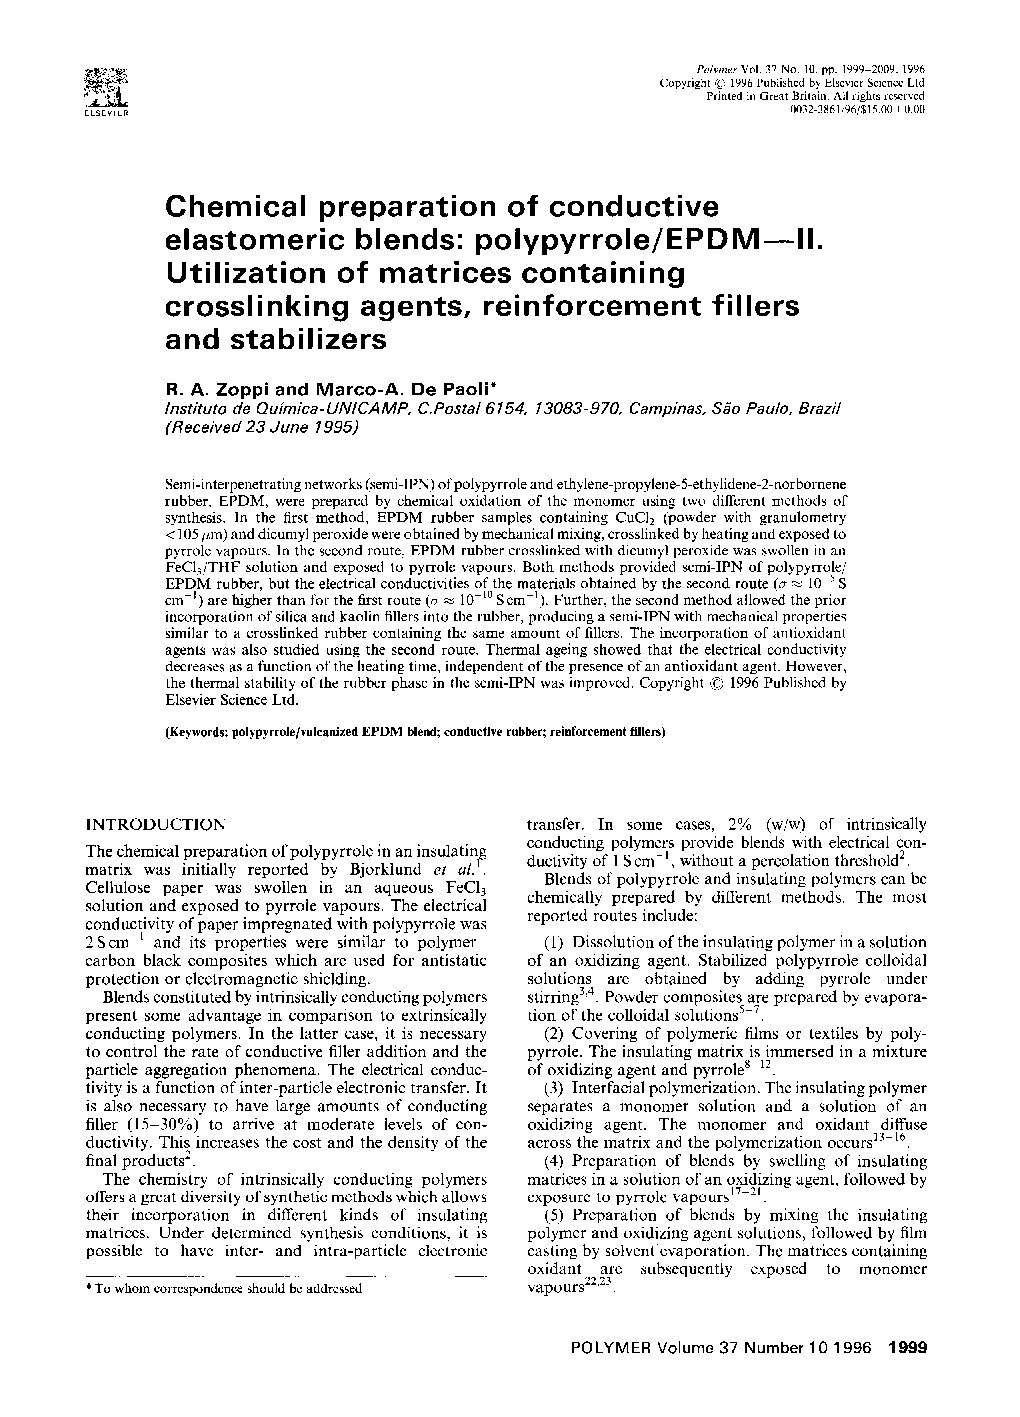 Chemical preparation of conductive elastomeric blends: polypyrrole/EPDM-II. Utilization of matrices containing crosslinking agents, reinforcement fillers and stabilizers